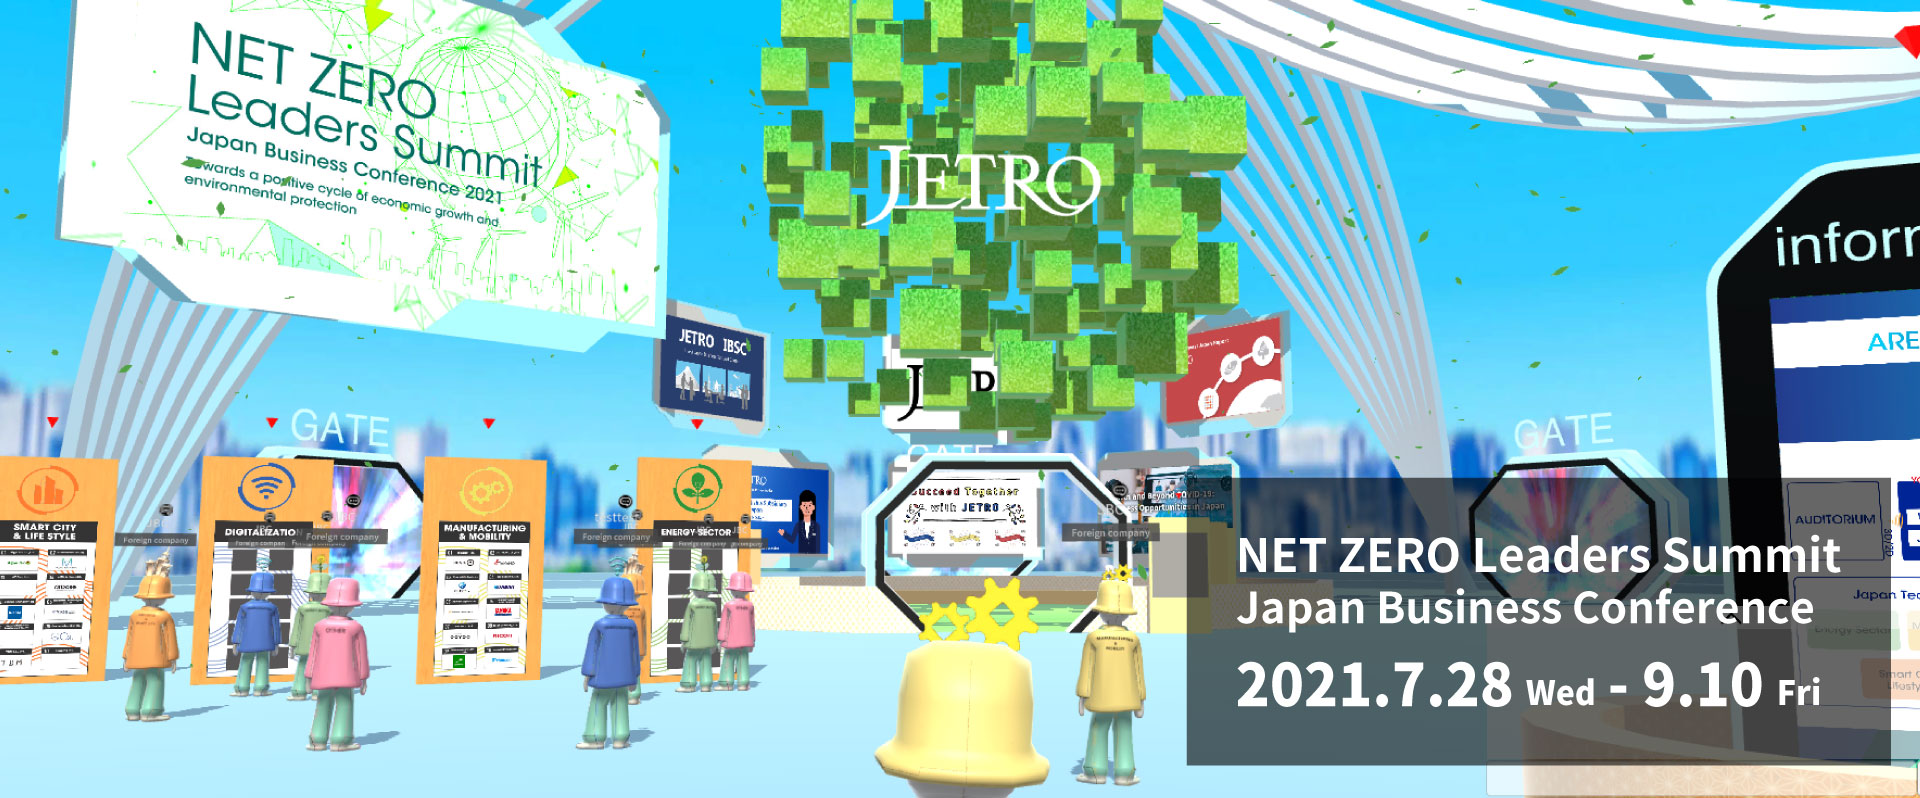 NET ZERO Leaders Summit Japan Business Conference 2021 Towards a positive cycle of economic growth and environmental protection